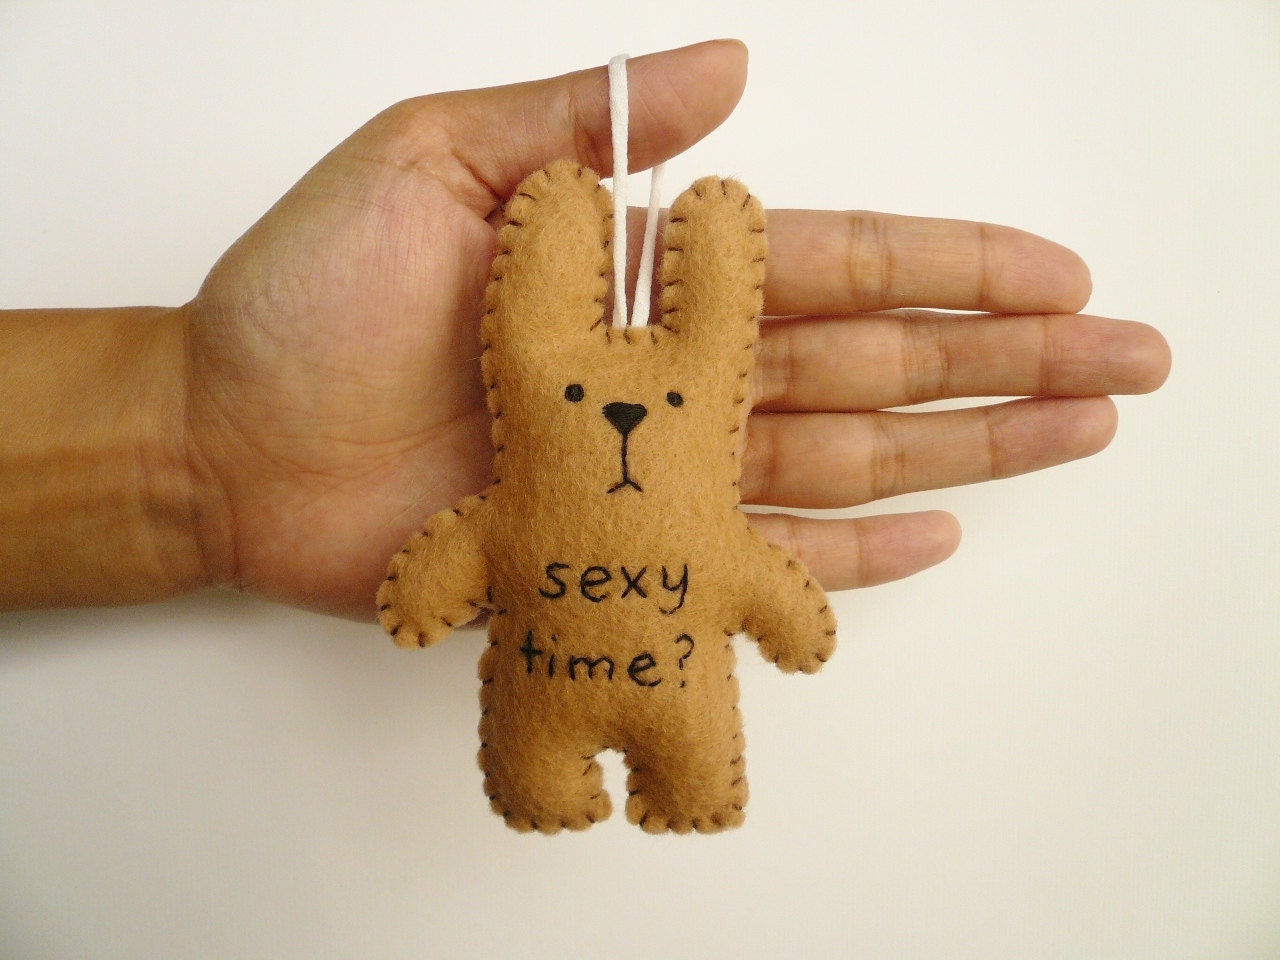 Funny Valentine Ornament funny bunny - Sexy time - tree decoration Christmas, office, nursury or gag gift